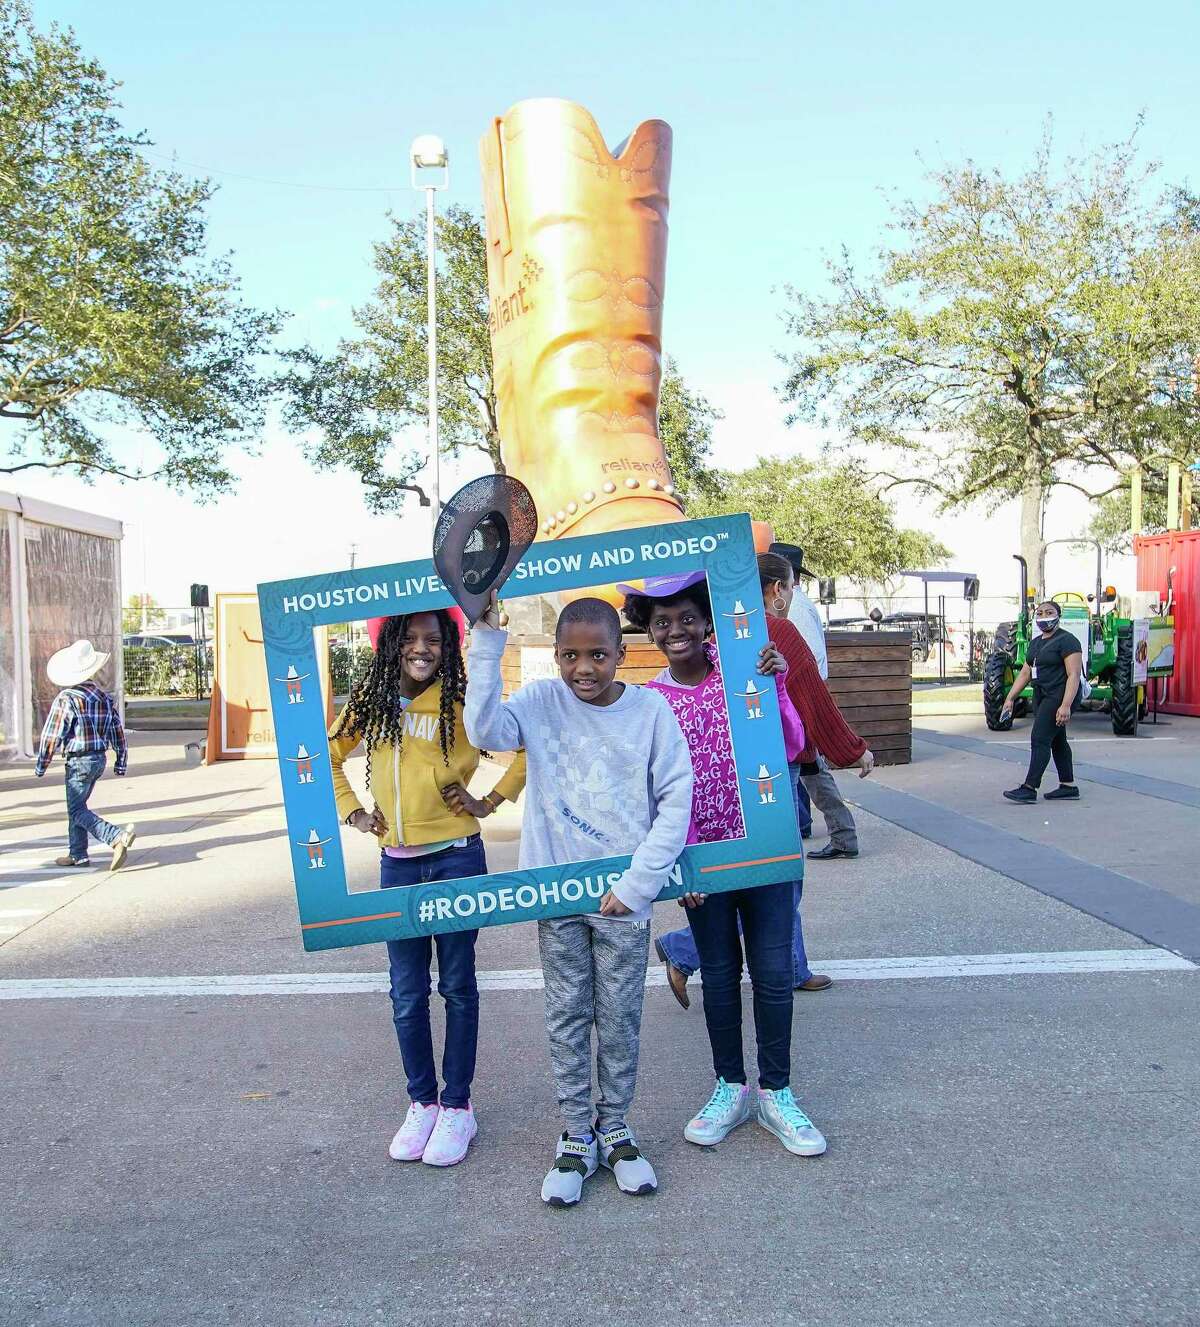 Amaya Washington, 10, left, with her brother, D.J., 9, and sister Ava, 10, get their photo taken by their parents during opening day of the Houston Livestock Show and Rodeo at NRG Park on Monday, Feb. 28, 2022 in Houston.